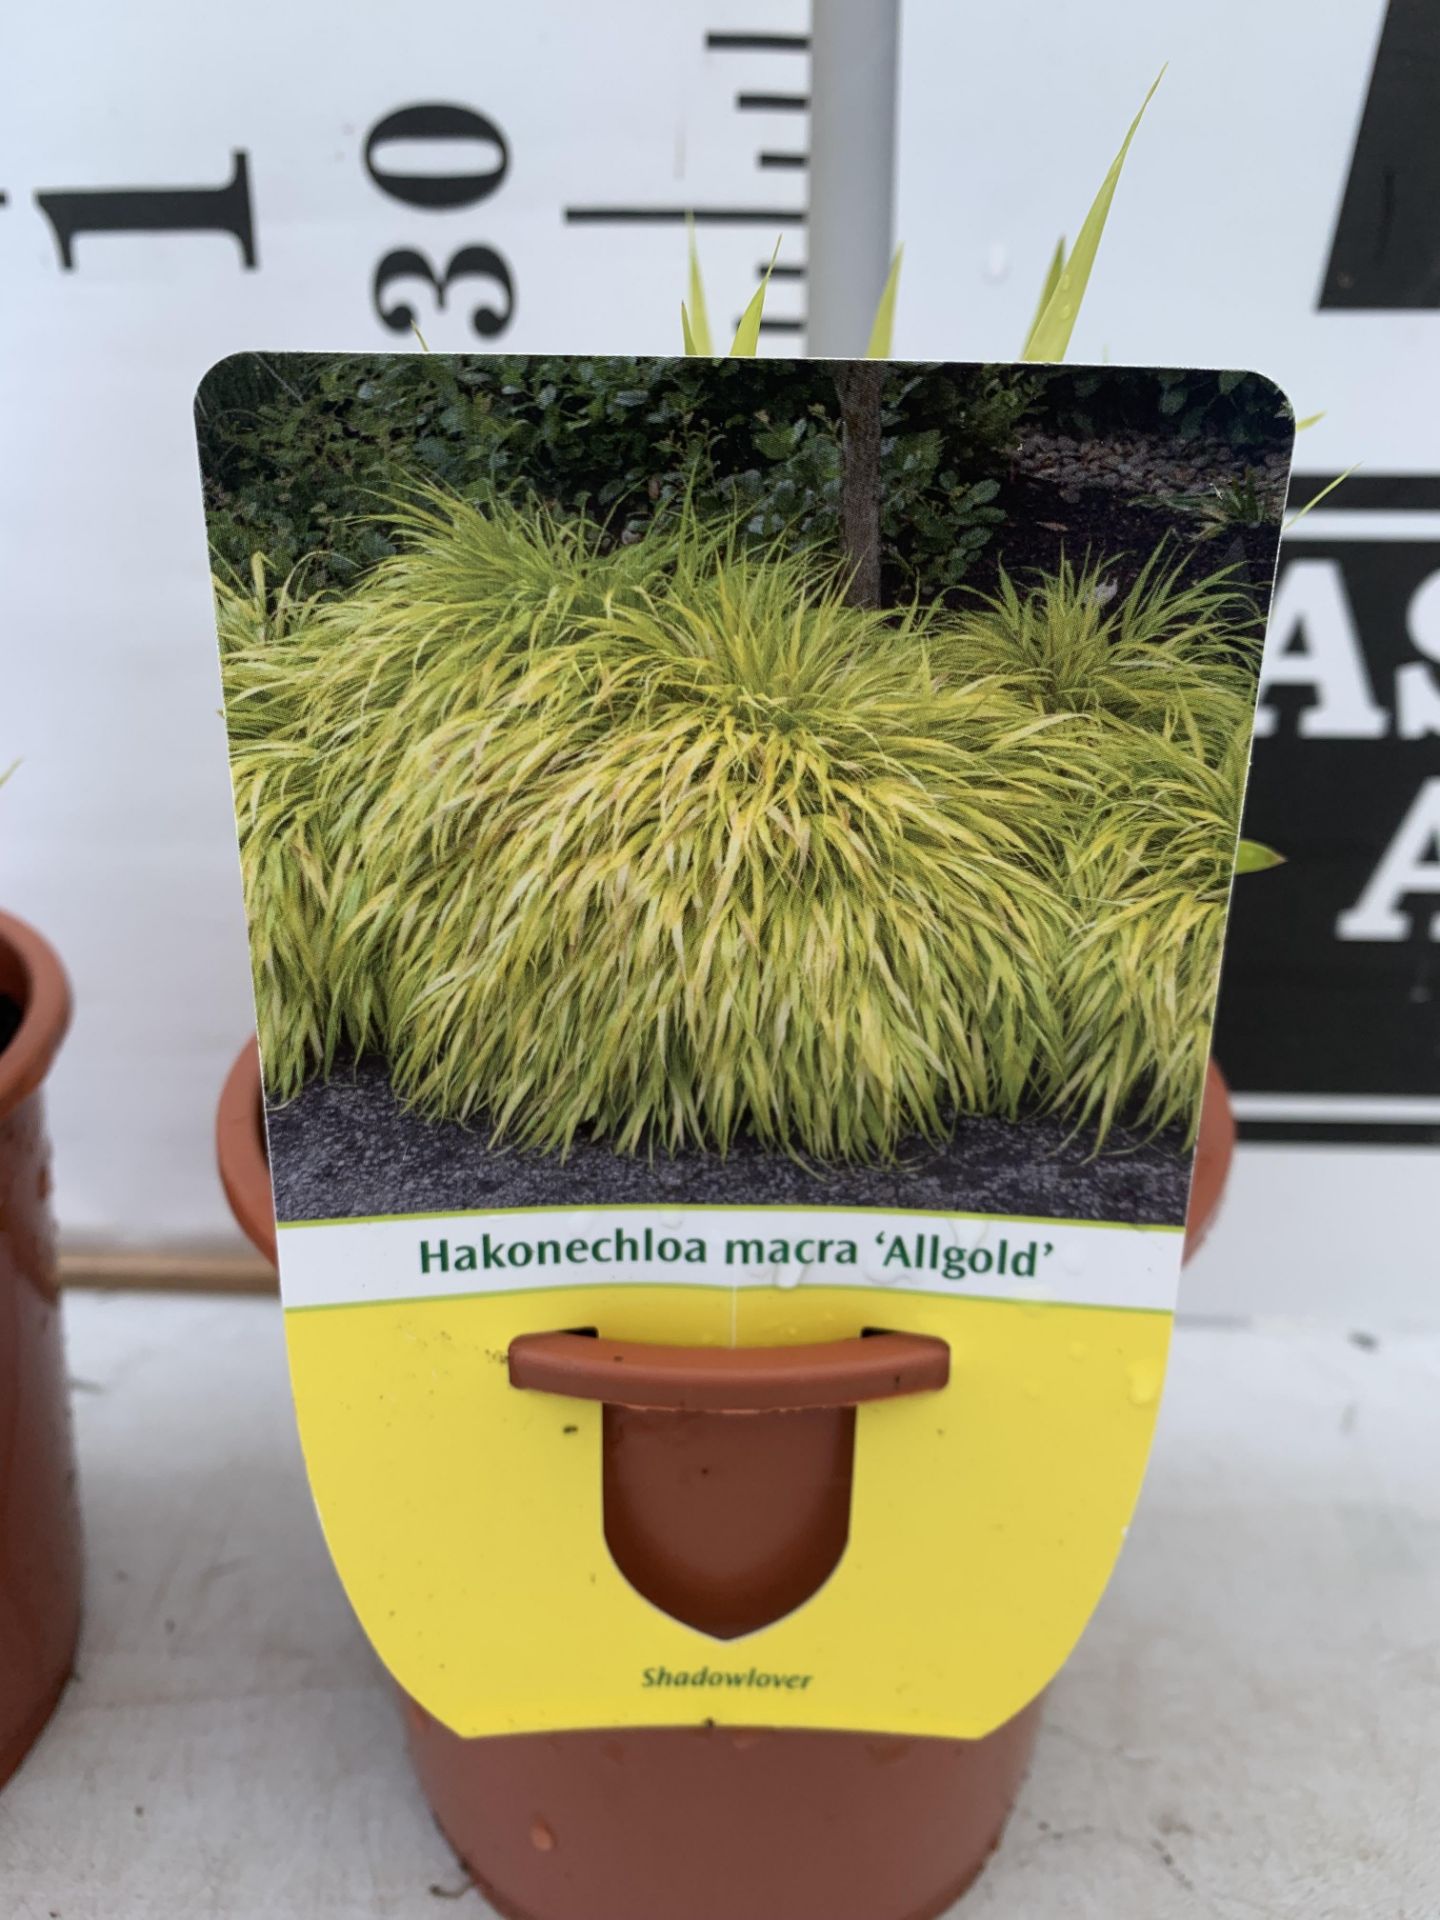 TWO ORNAMENTAL GRASSES HAKONECHLOA MACRA 'ALLGOLD' IN 1 LTR POTS PLUS VAT TO BE SOLD FOR THE TWO - Image 7 of 8